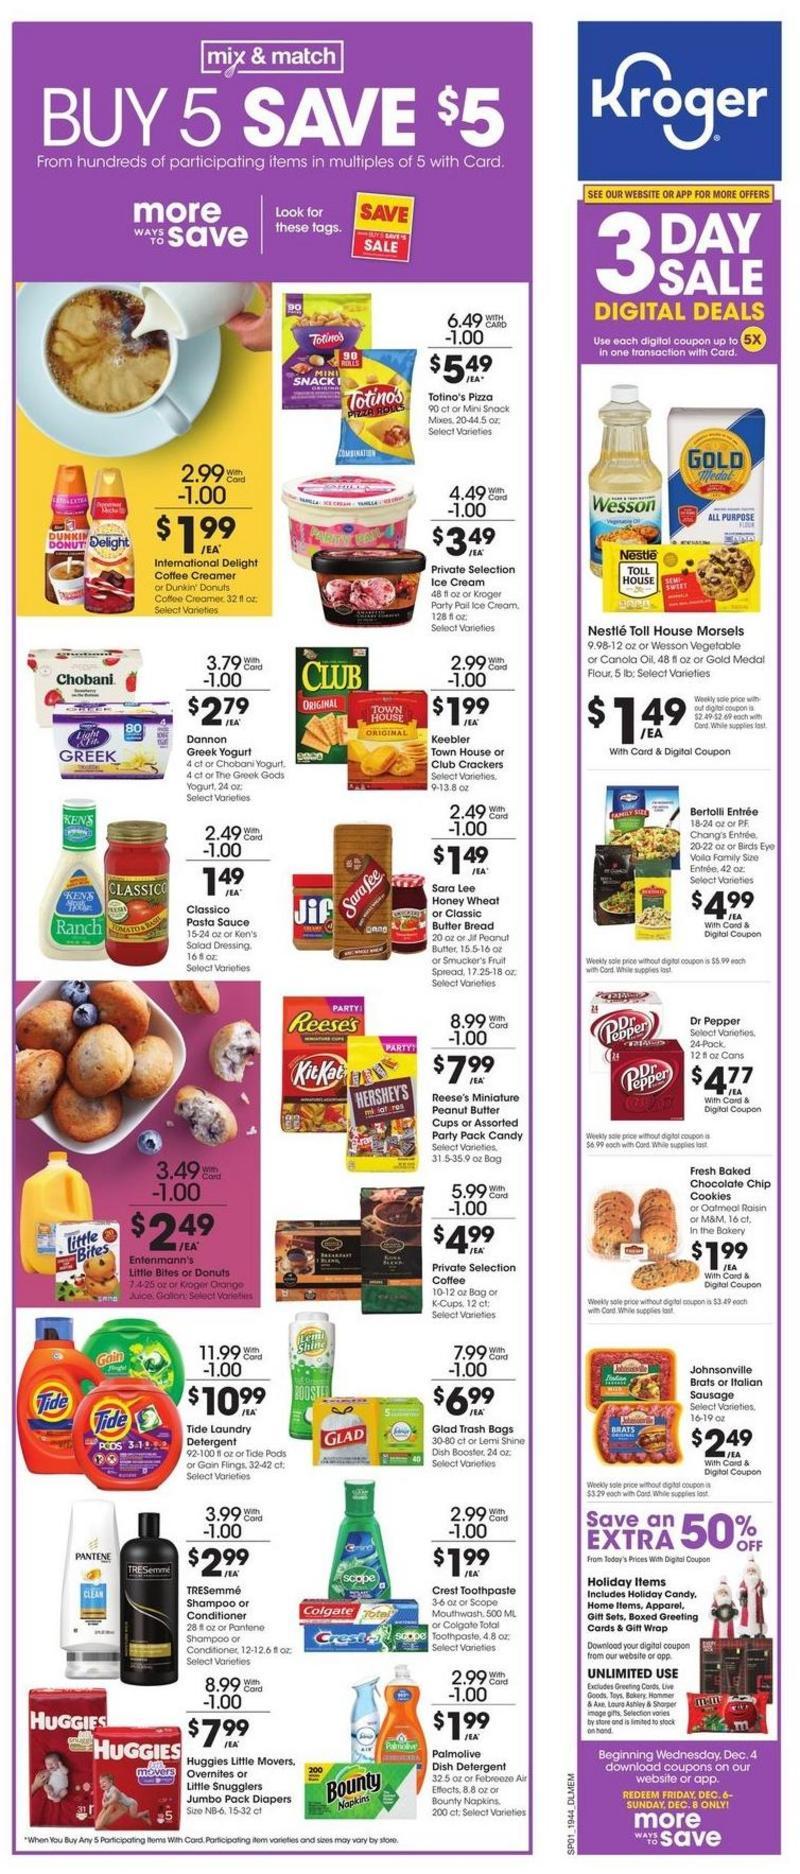 Kroger Weekly Ad from December 4